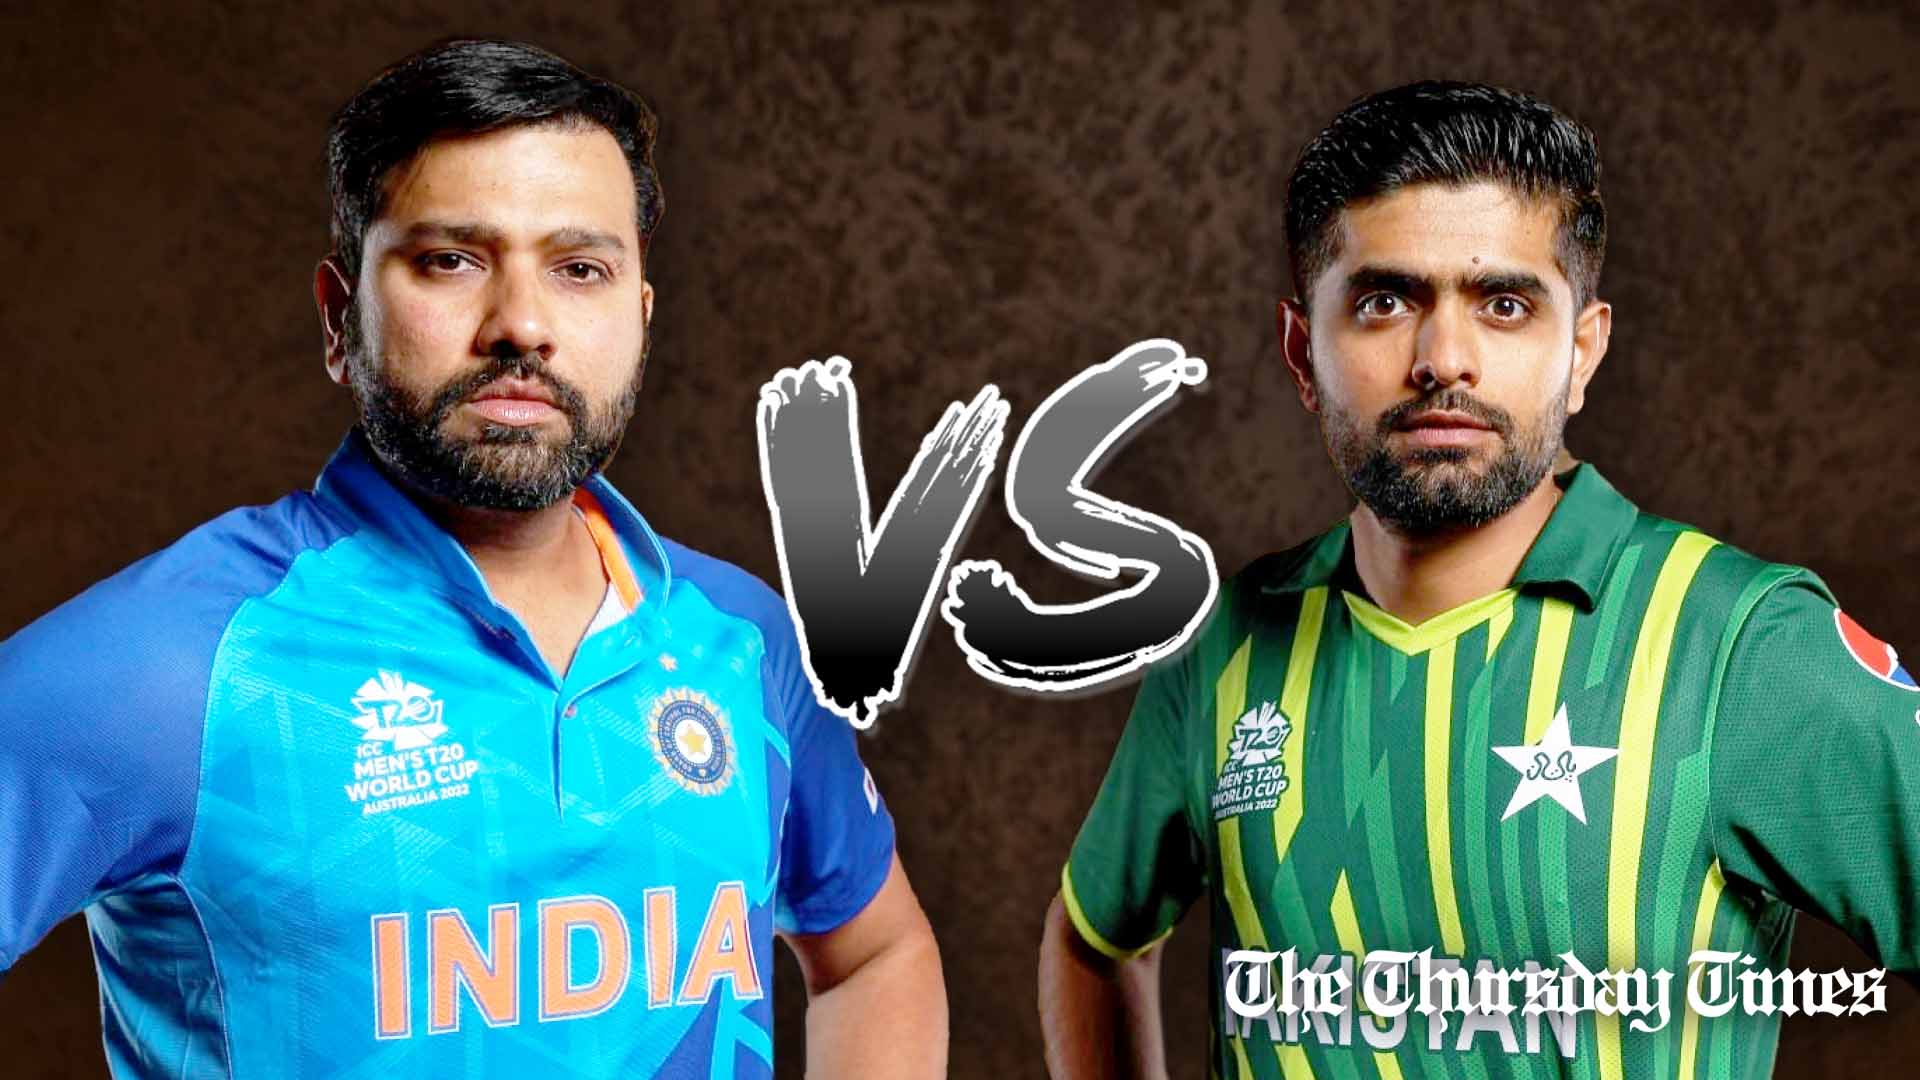 Bharati and Pakistani Cricket Team captains Rohit Sharma (L) and Babar Azam (R) are shown respectively at Melbourne. — FILE/ICC/THE THURSDAY TIMES